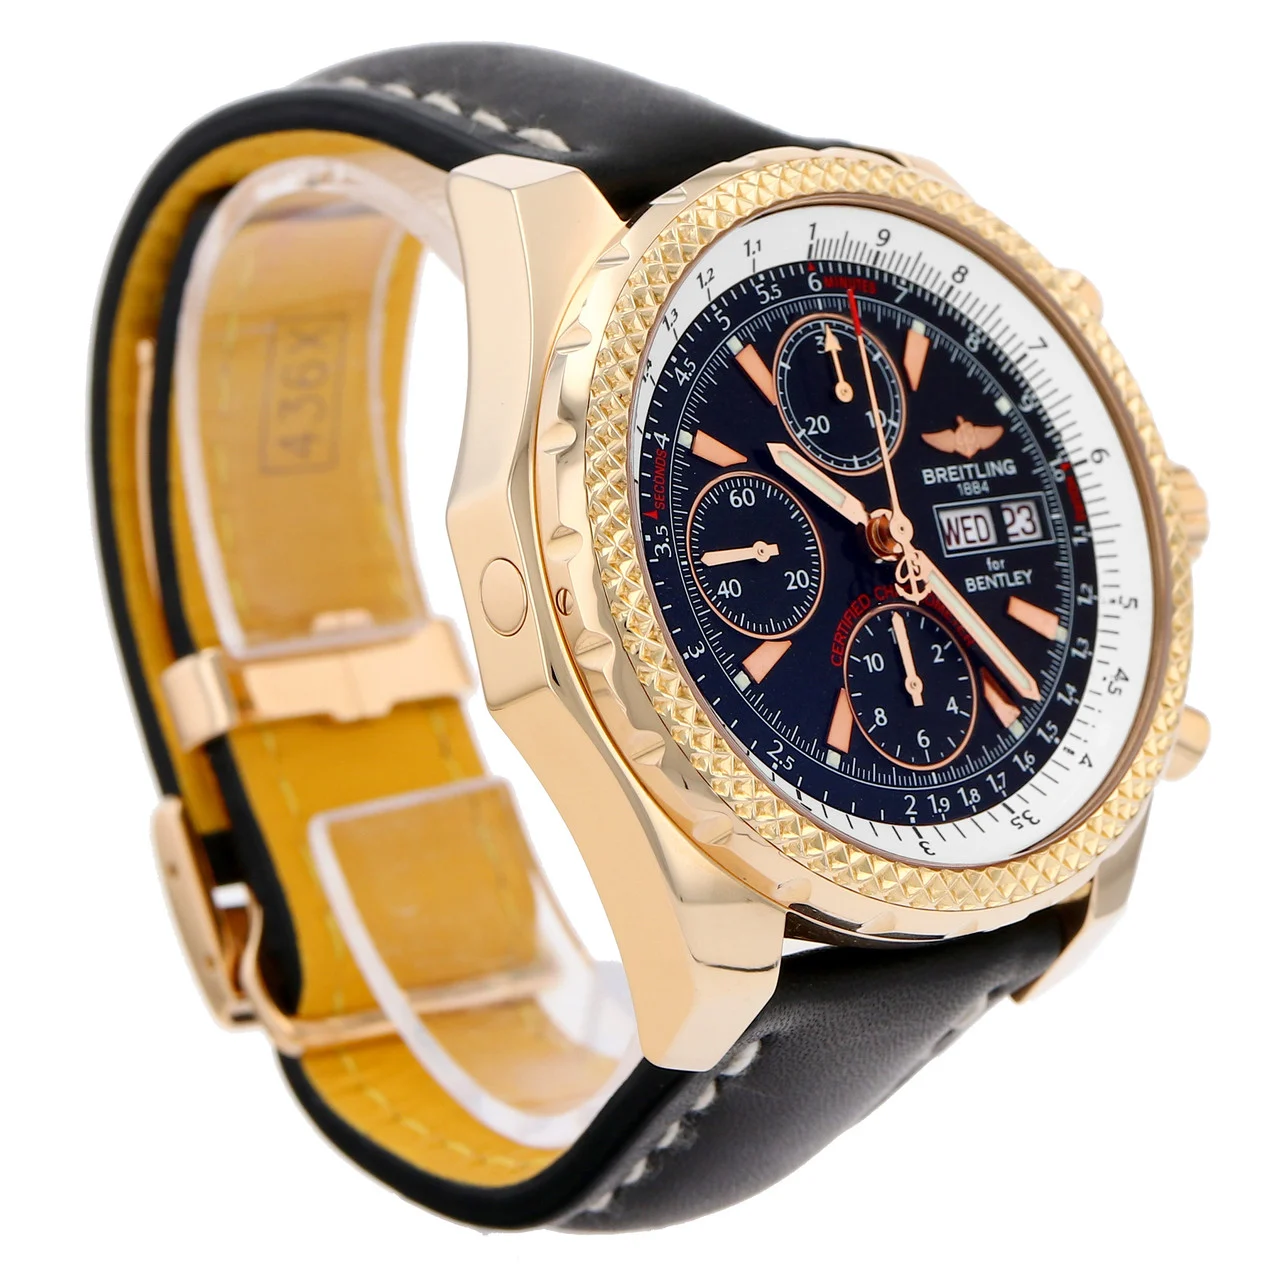 2015 Breitling Bentley Continental GT 46 Yellow Gold / Black / Strap - Limited to 500 Pieces H13363  Listing Image 3